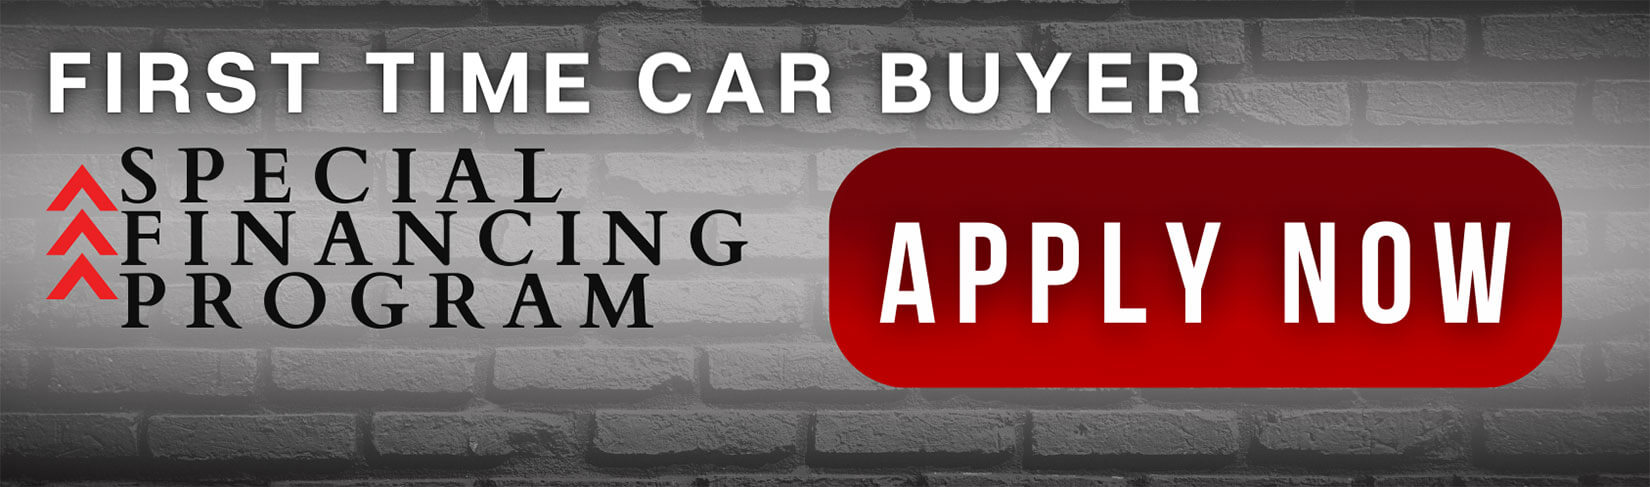 First time car buyer, special financing program, click here to apply now.